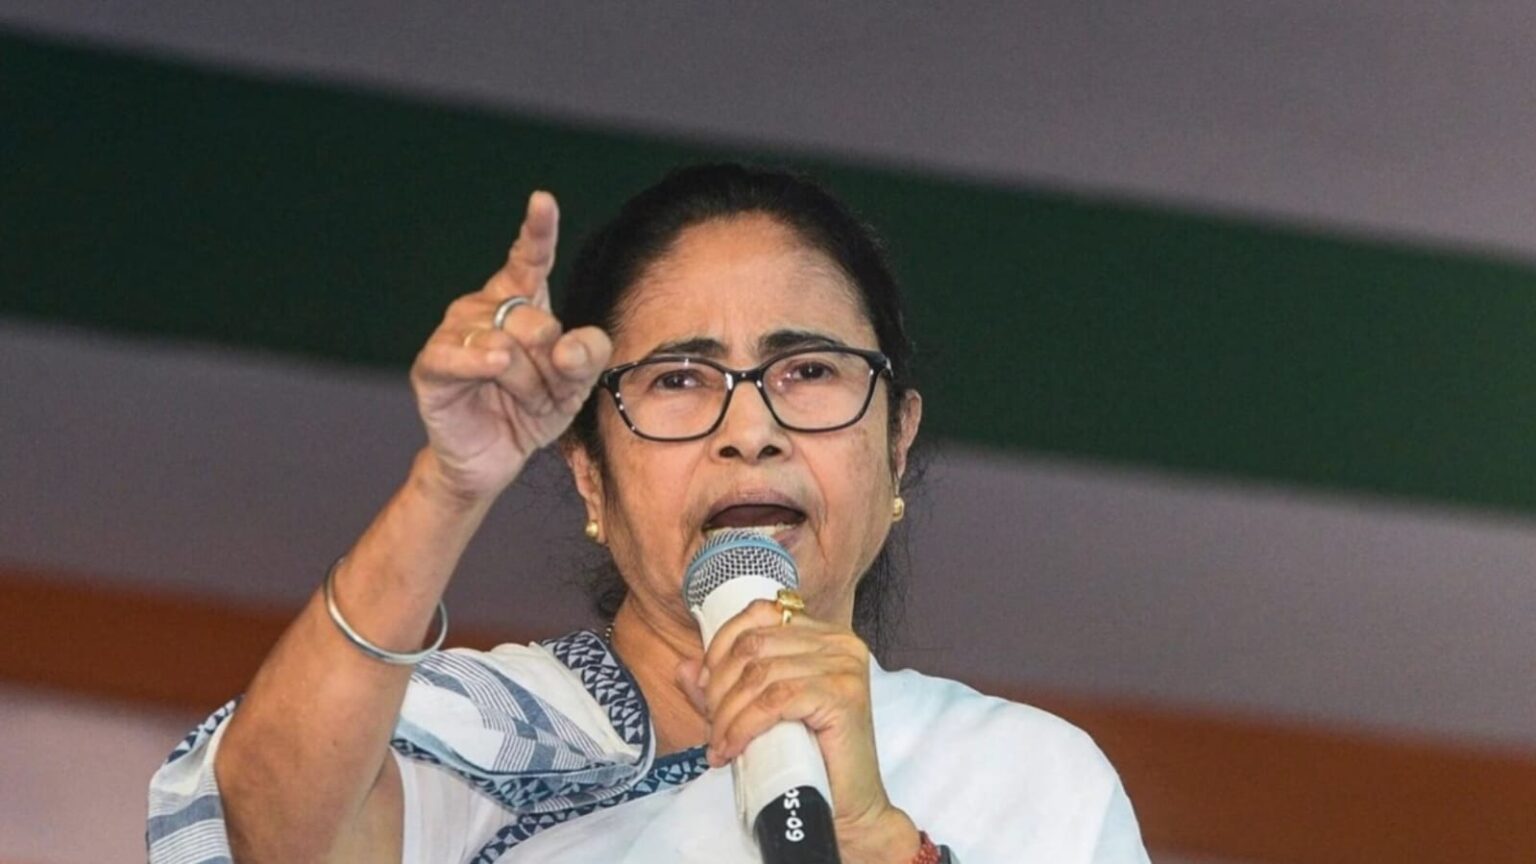 Mamta Banerjee objection on Bhagwa colored practice jersey of Indian cricket team Mamta Banerjee objection on saffron colored practice jersey of Indian cricket team